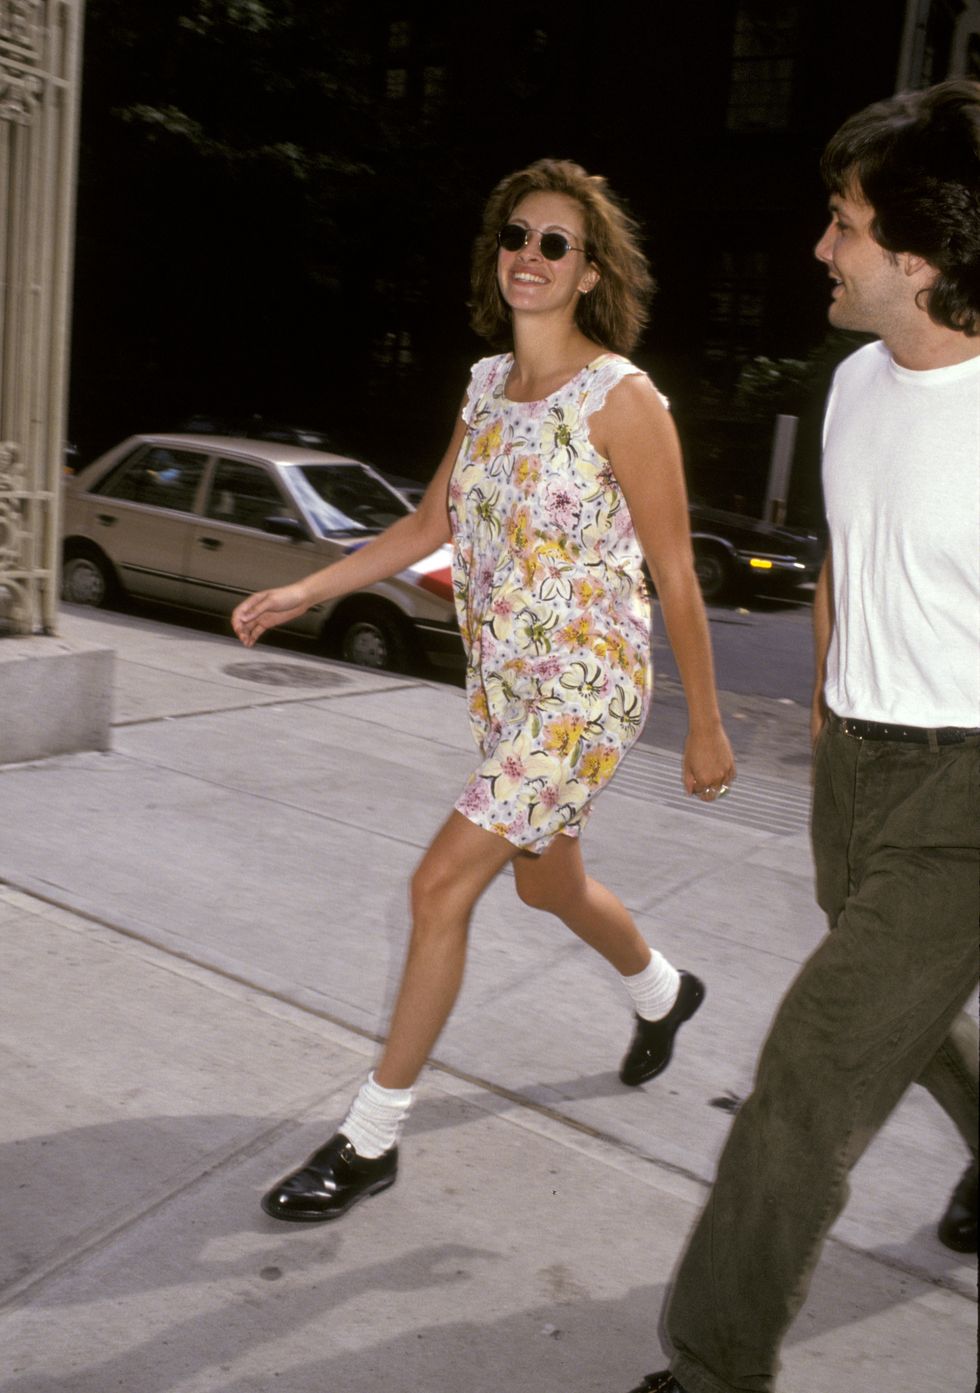 julia roberts arriving at the morgan hotel after having lunch august 11, 1991